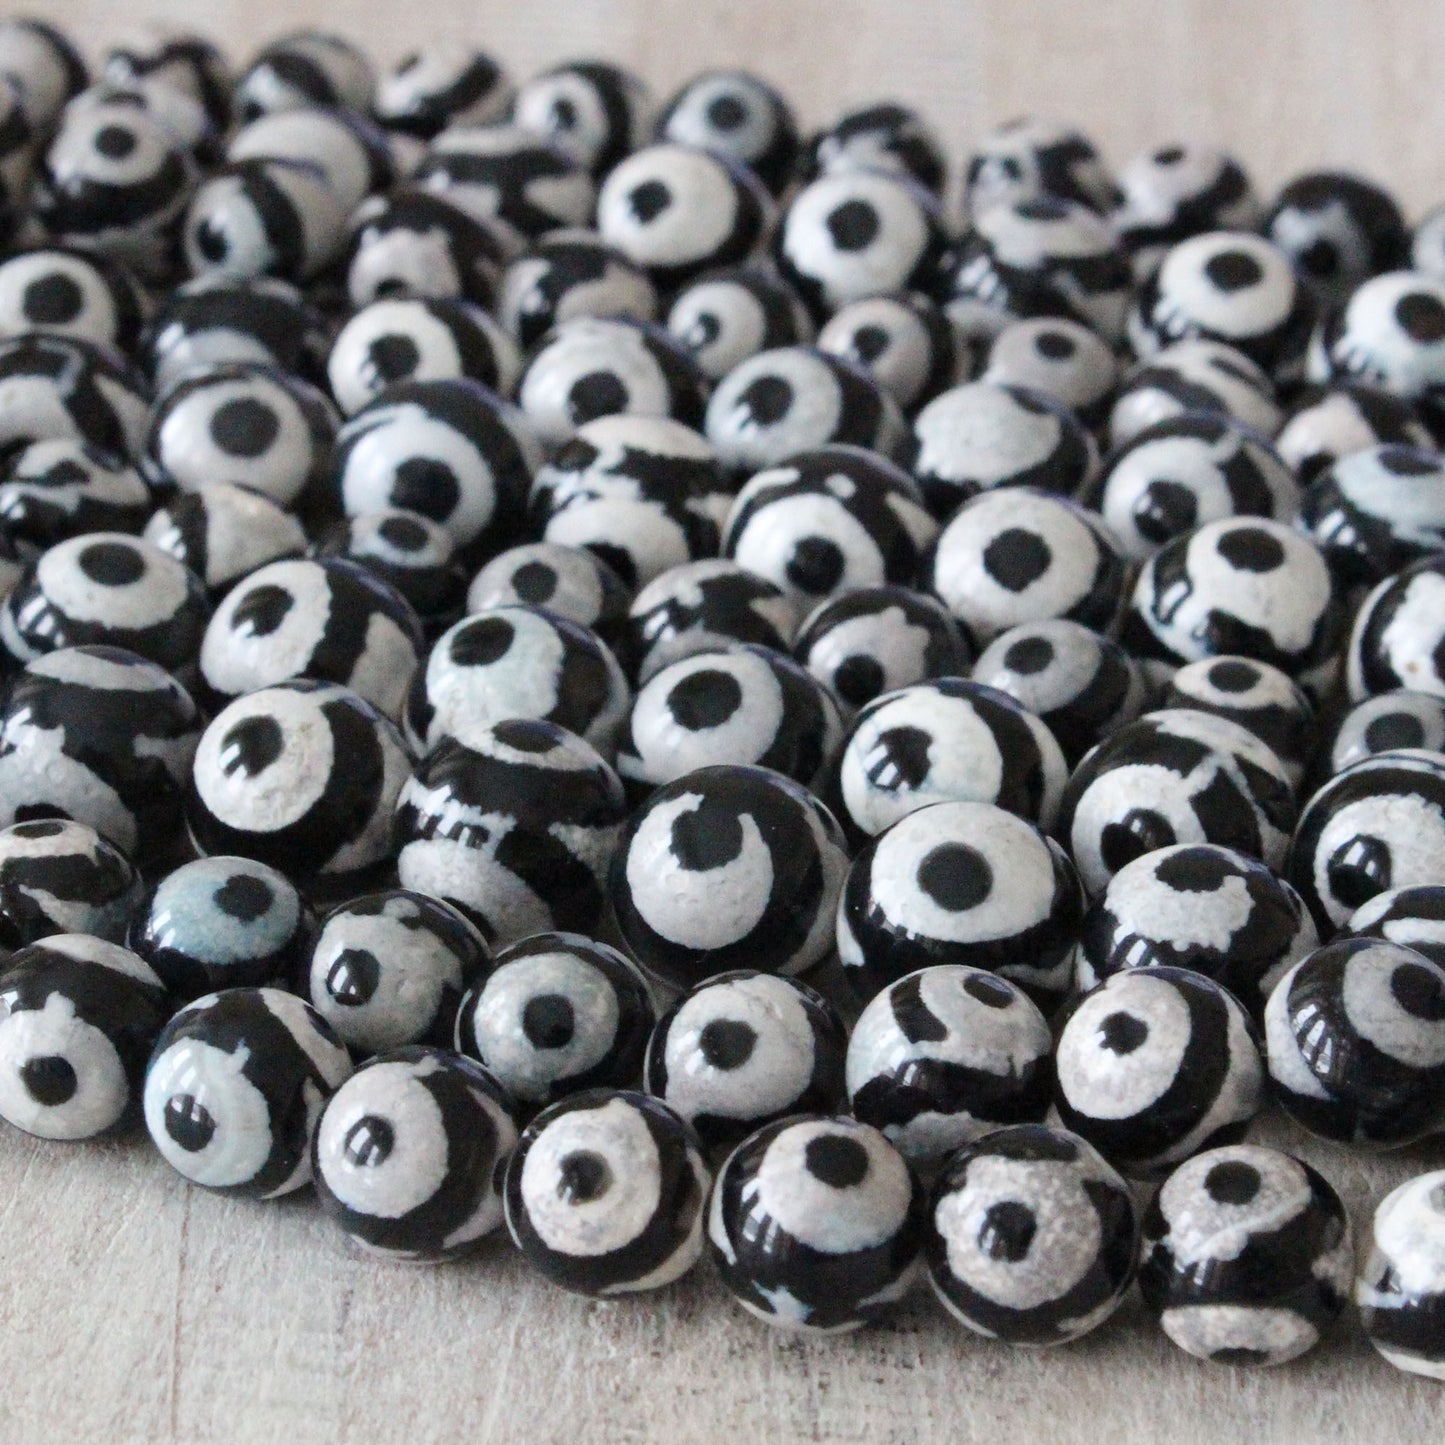 10mm Black and White Agate Beads - 16 Inches